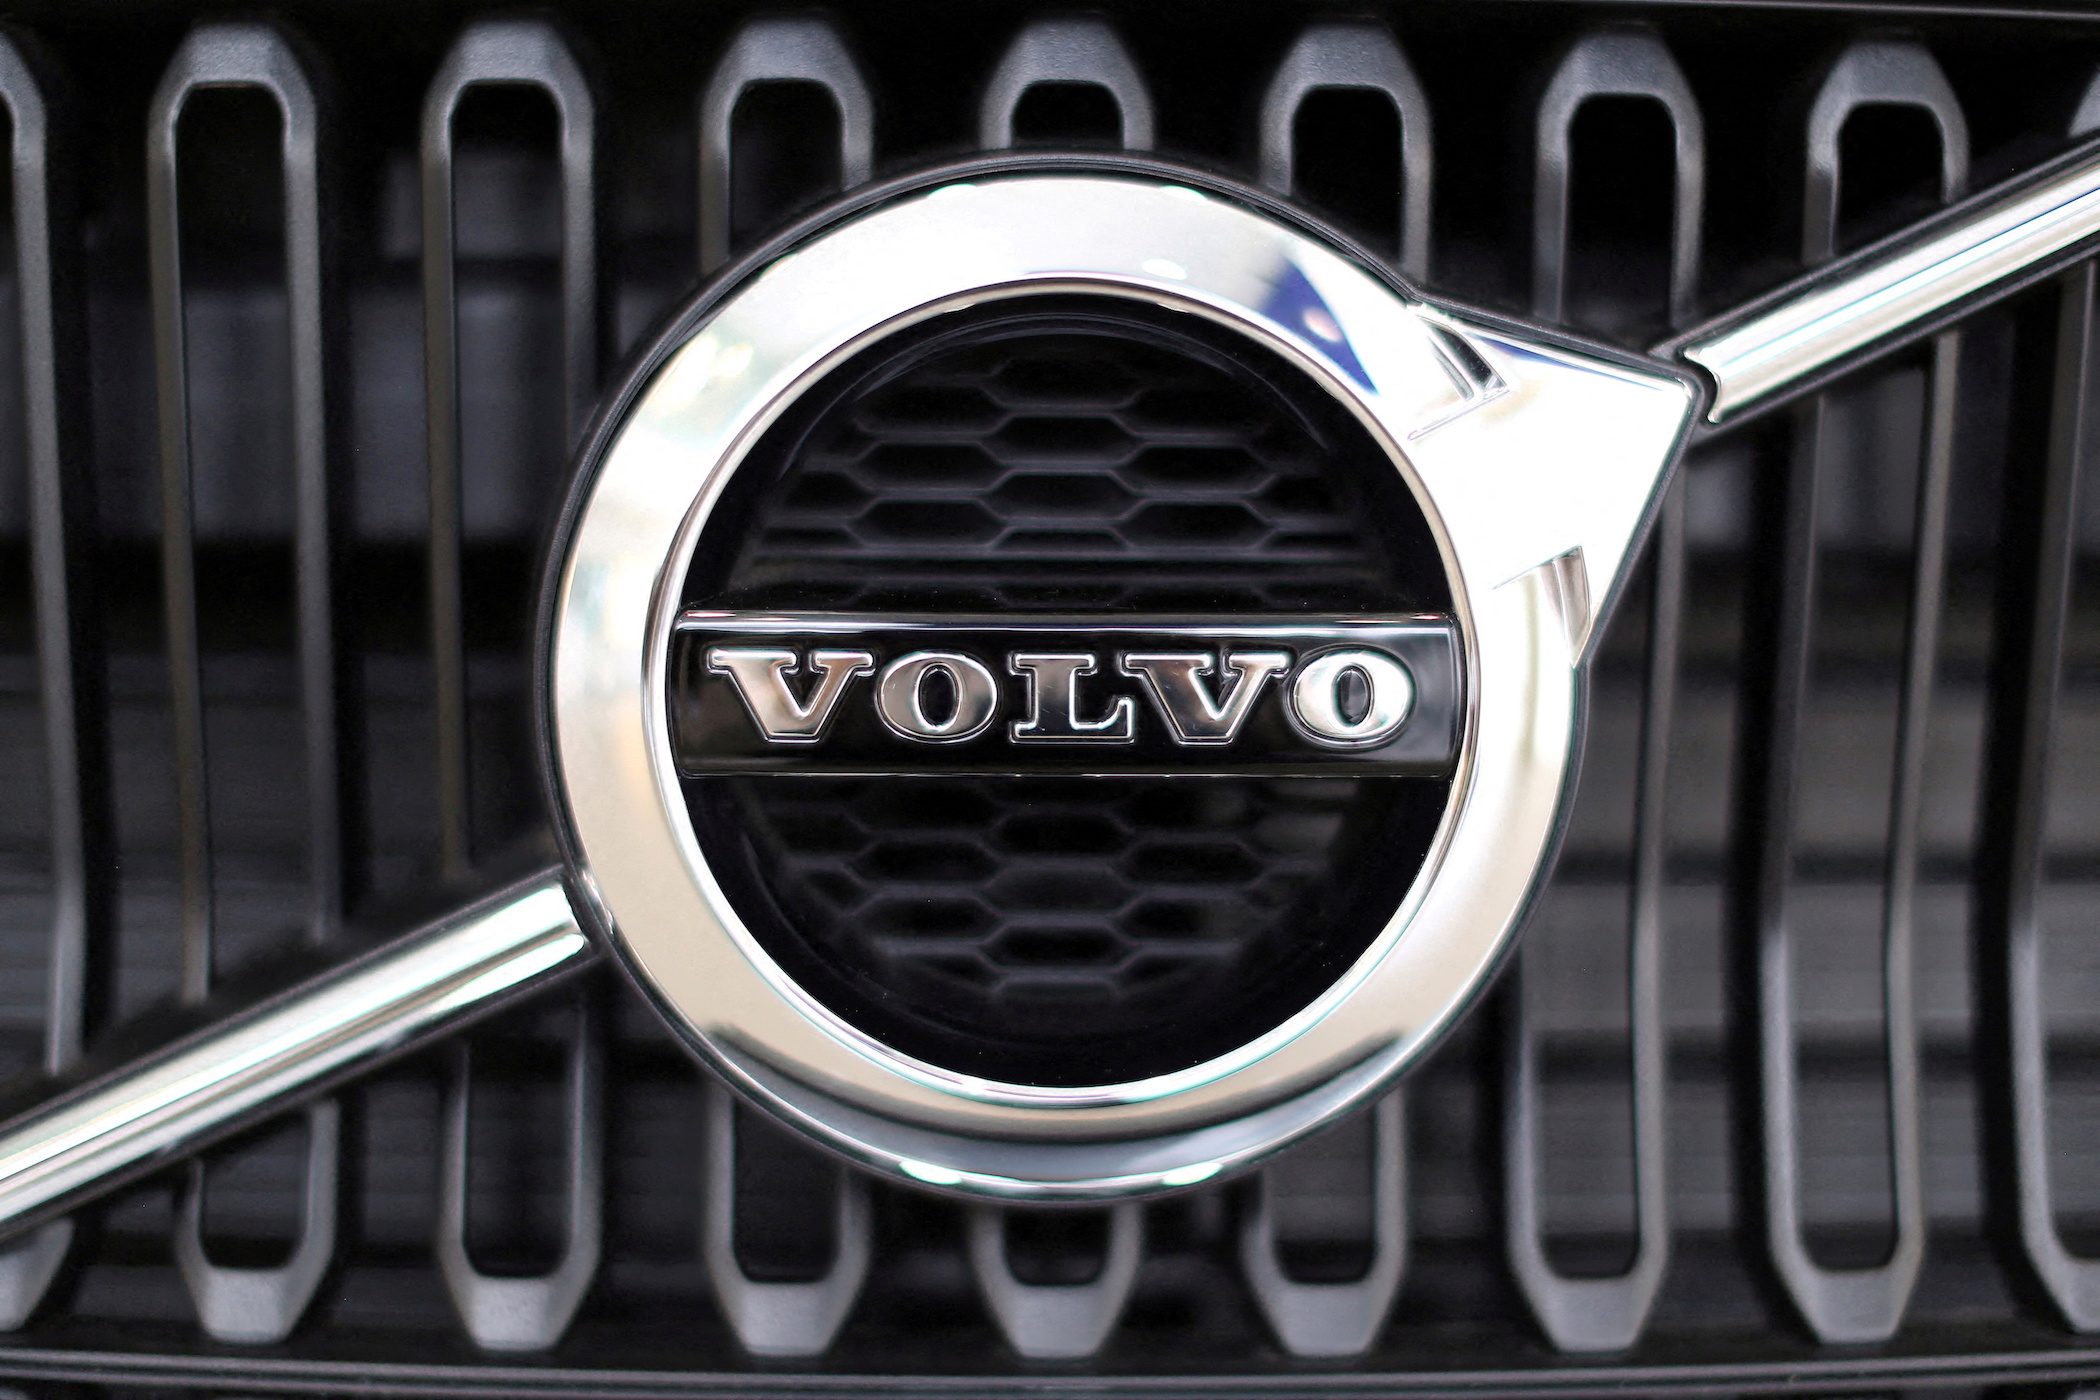 As sanctions bite, Volvo suspends car shipments to Russia